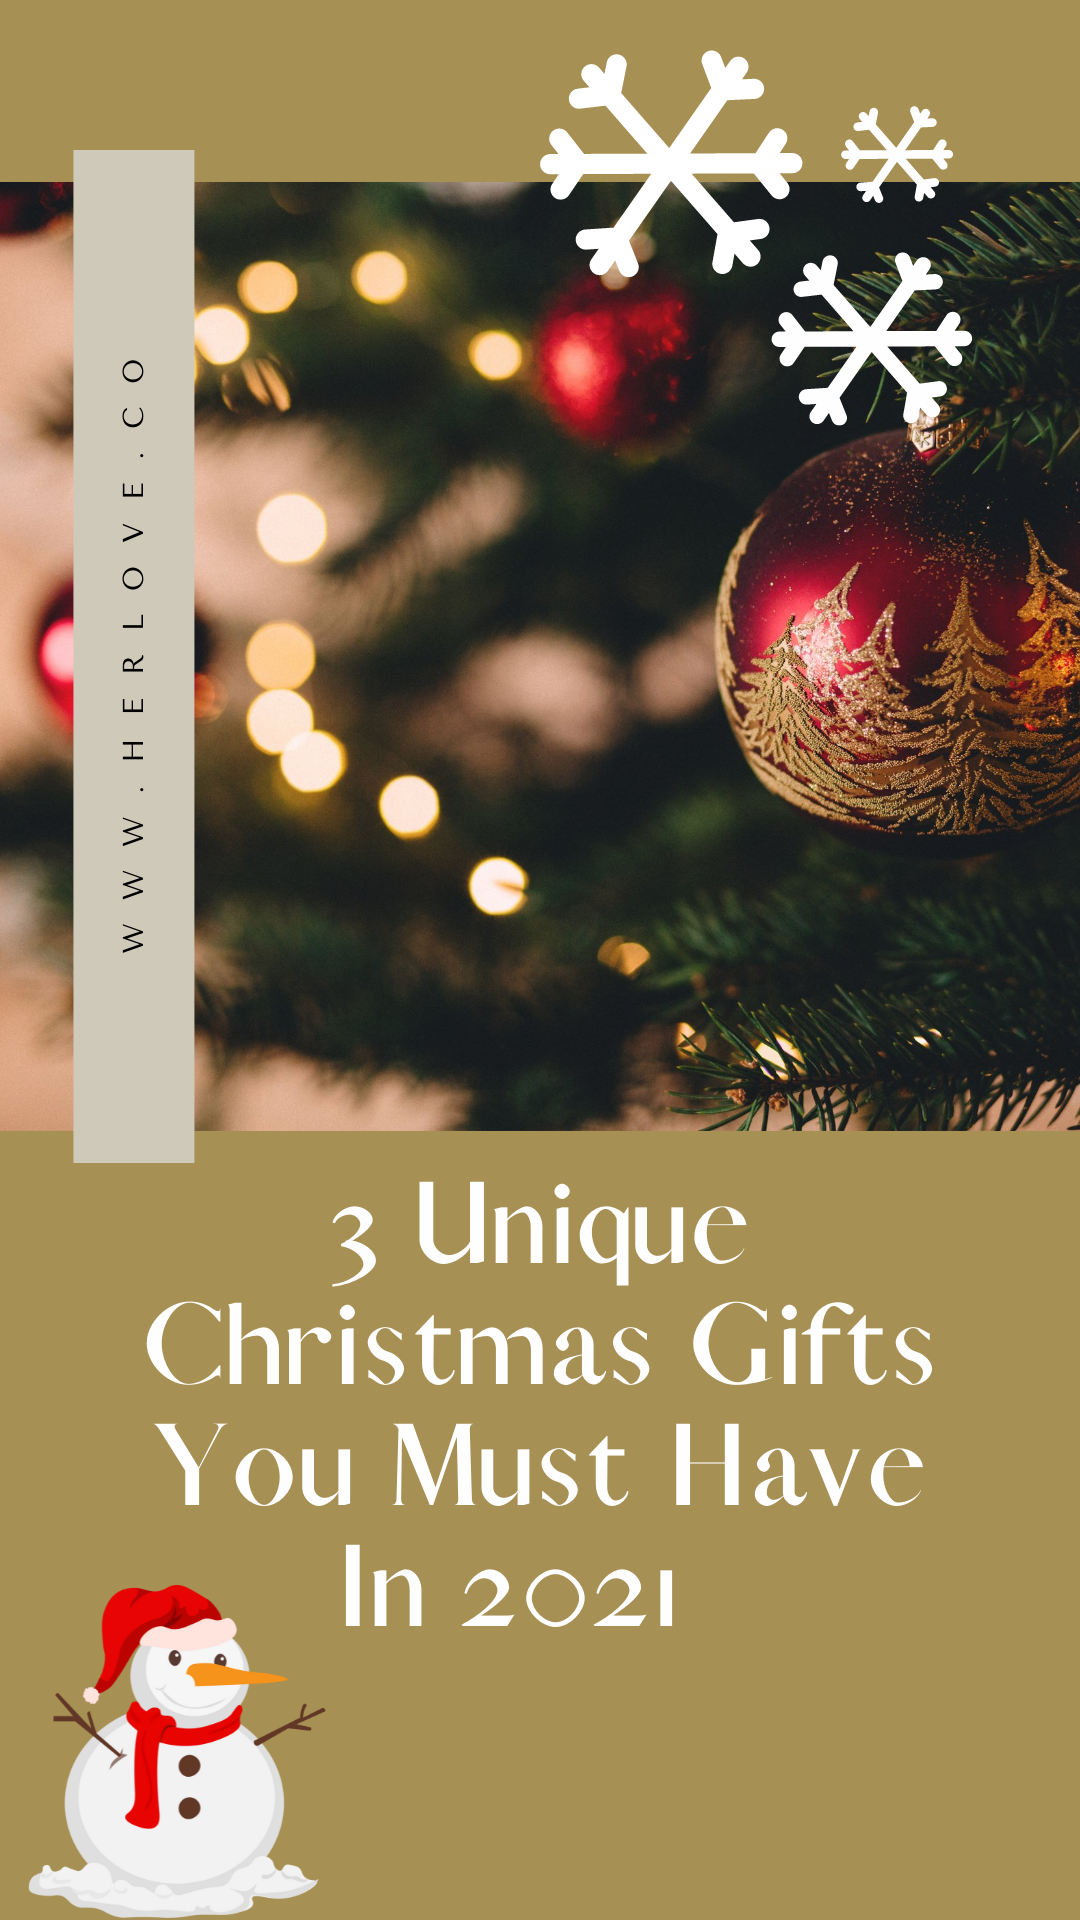 3 Unique Christmas Gifts You Must Have In 2021